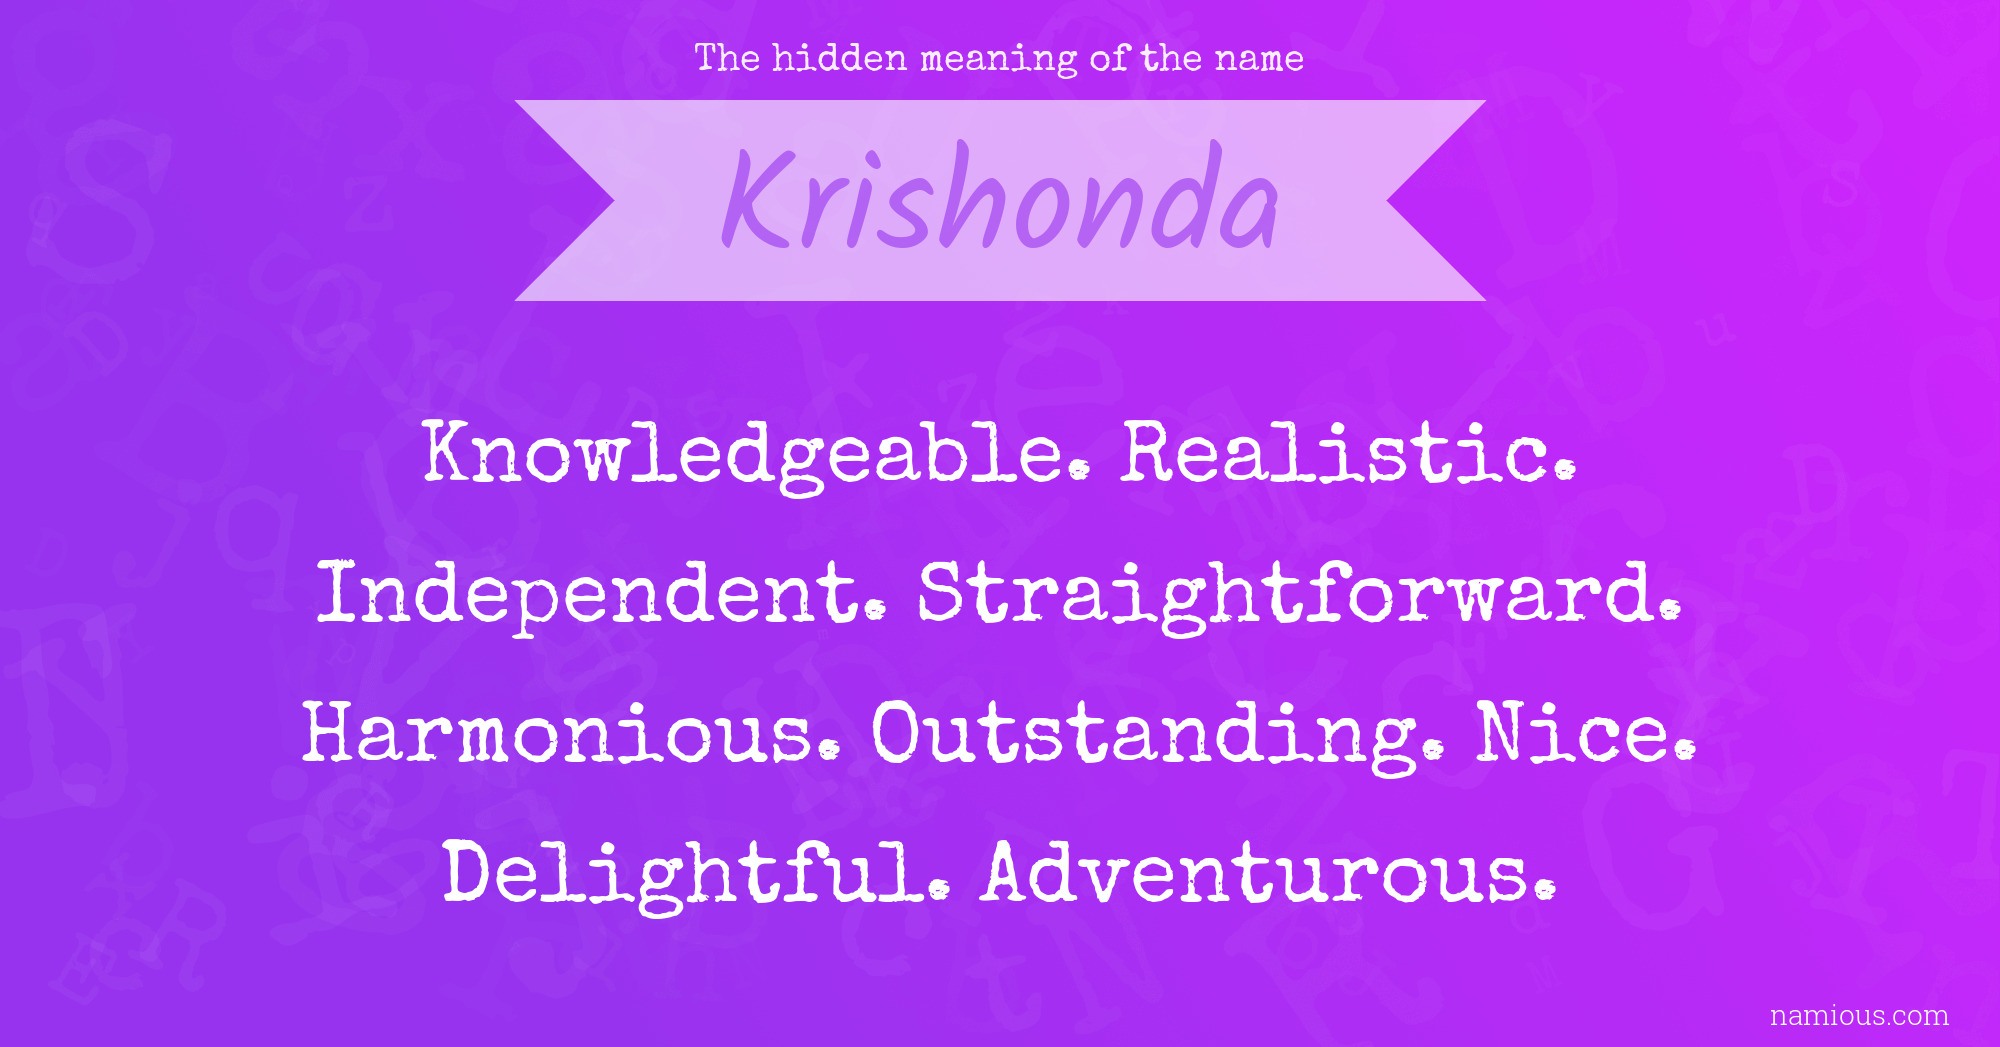 The hidden meaning of the name Krishonda